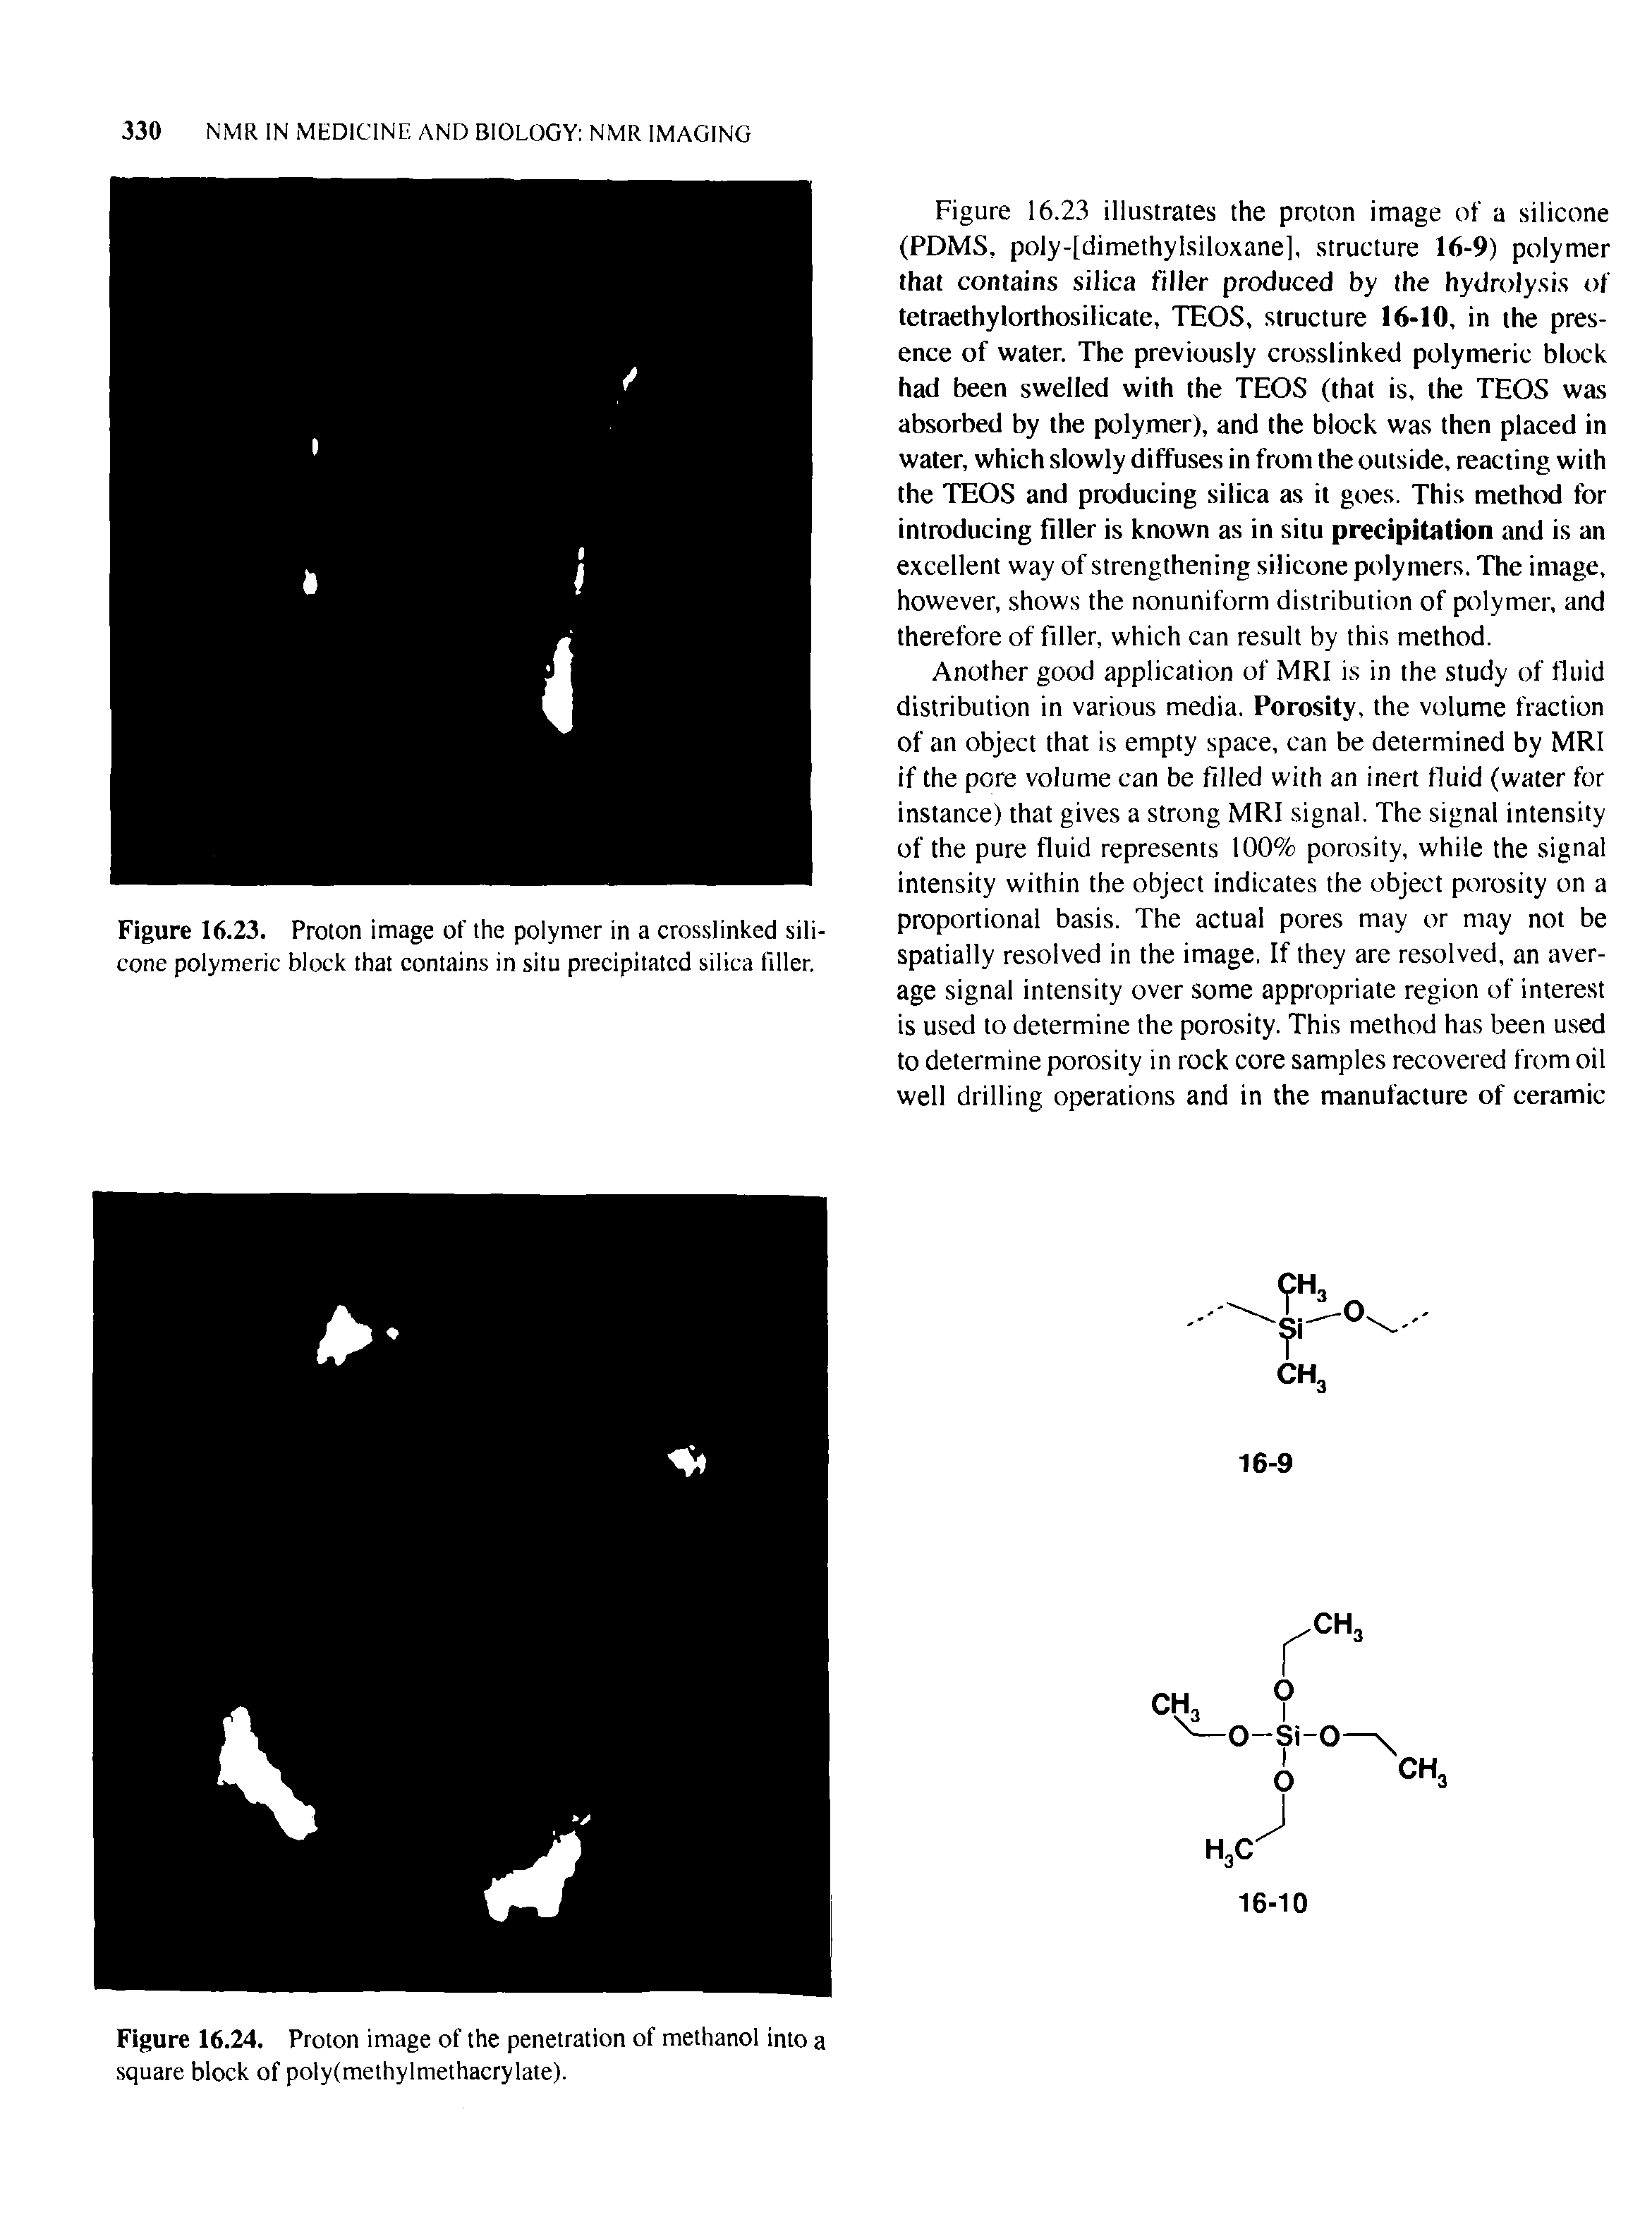 Figure 16.23. Proton image of the polymer in a crosslinked silicone polymeric block that contains in situ precipitated silica filler.